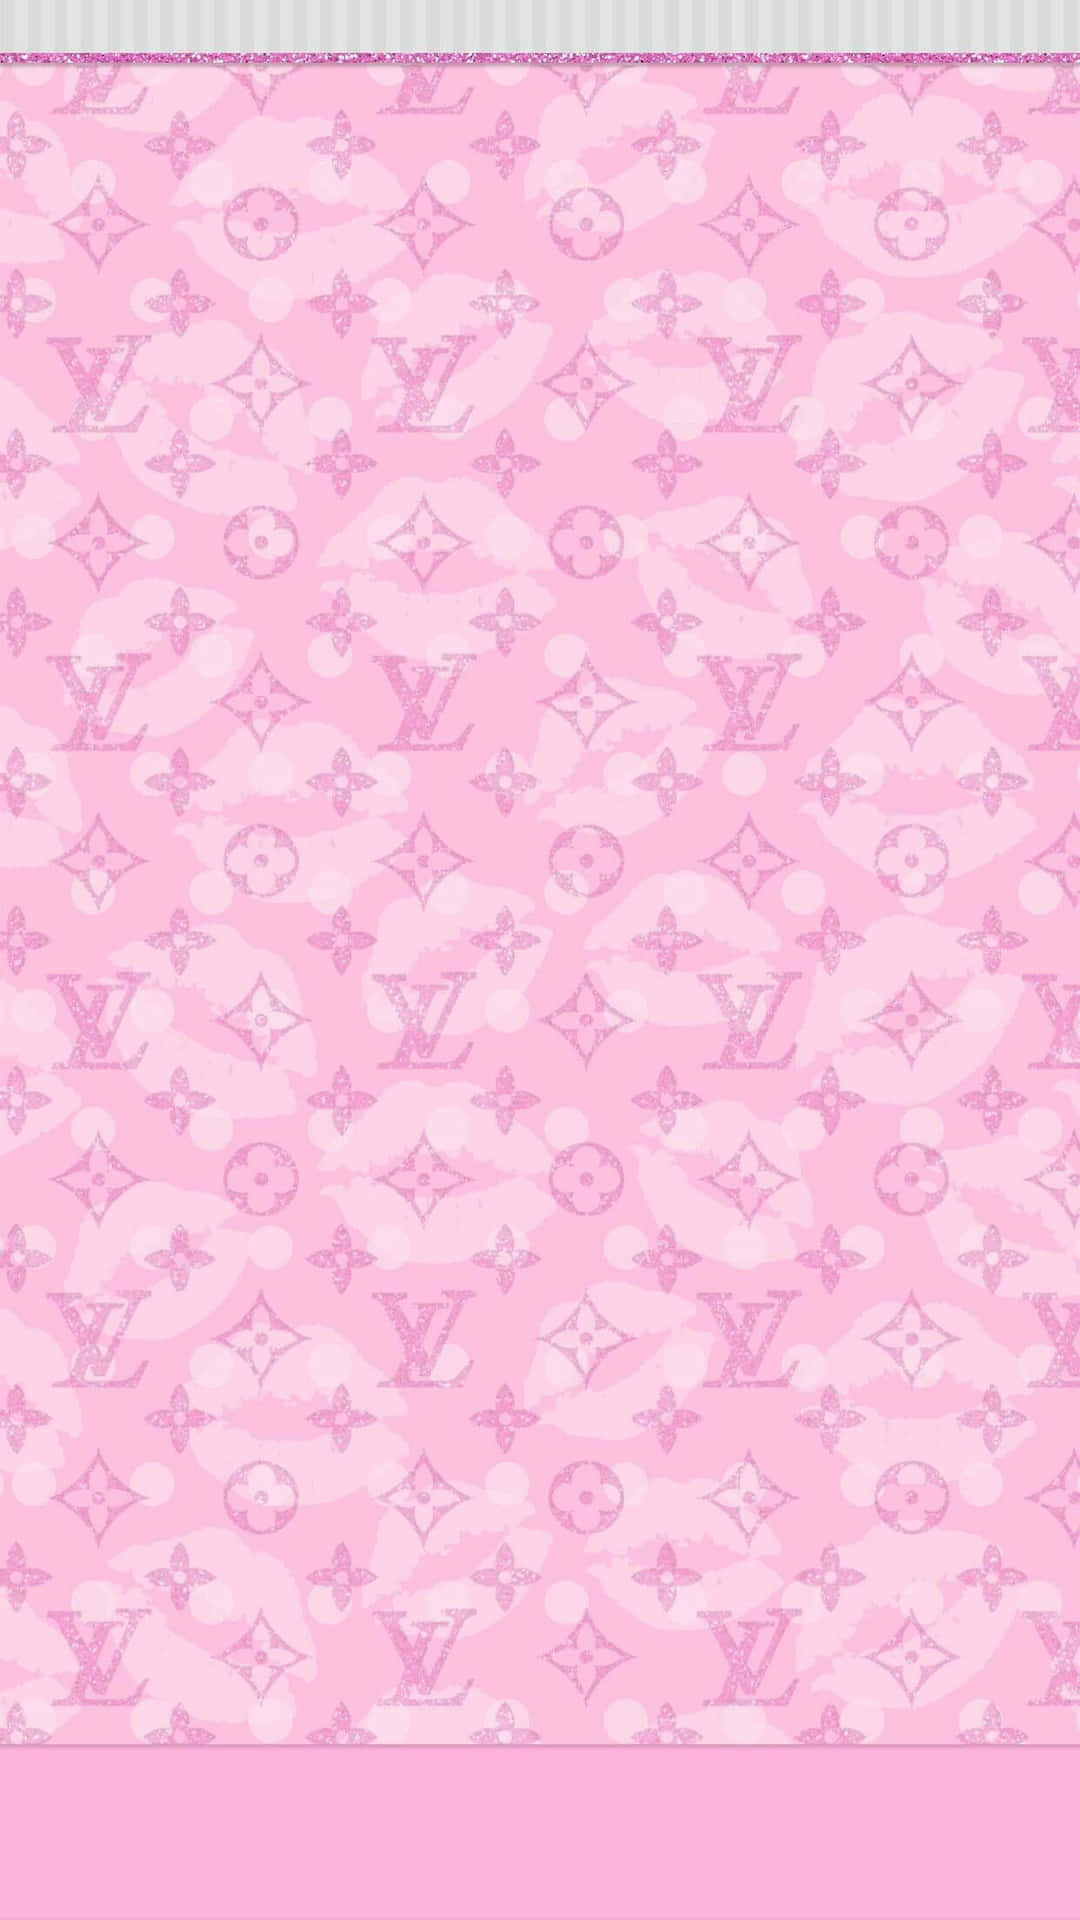 Pink Louis Vuitton wallpaper by Jay2slimy - Download on ZEDGE™